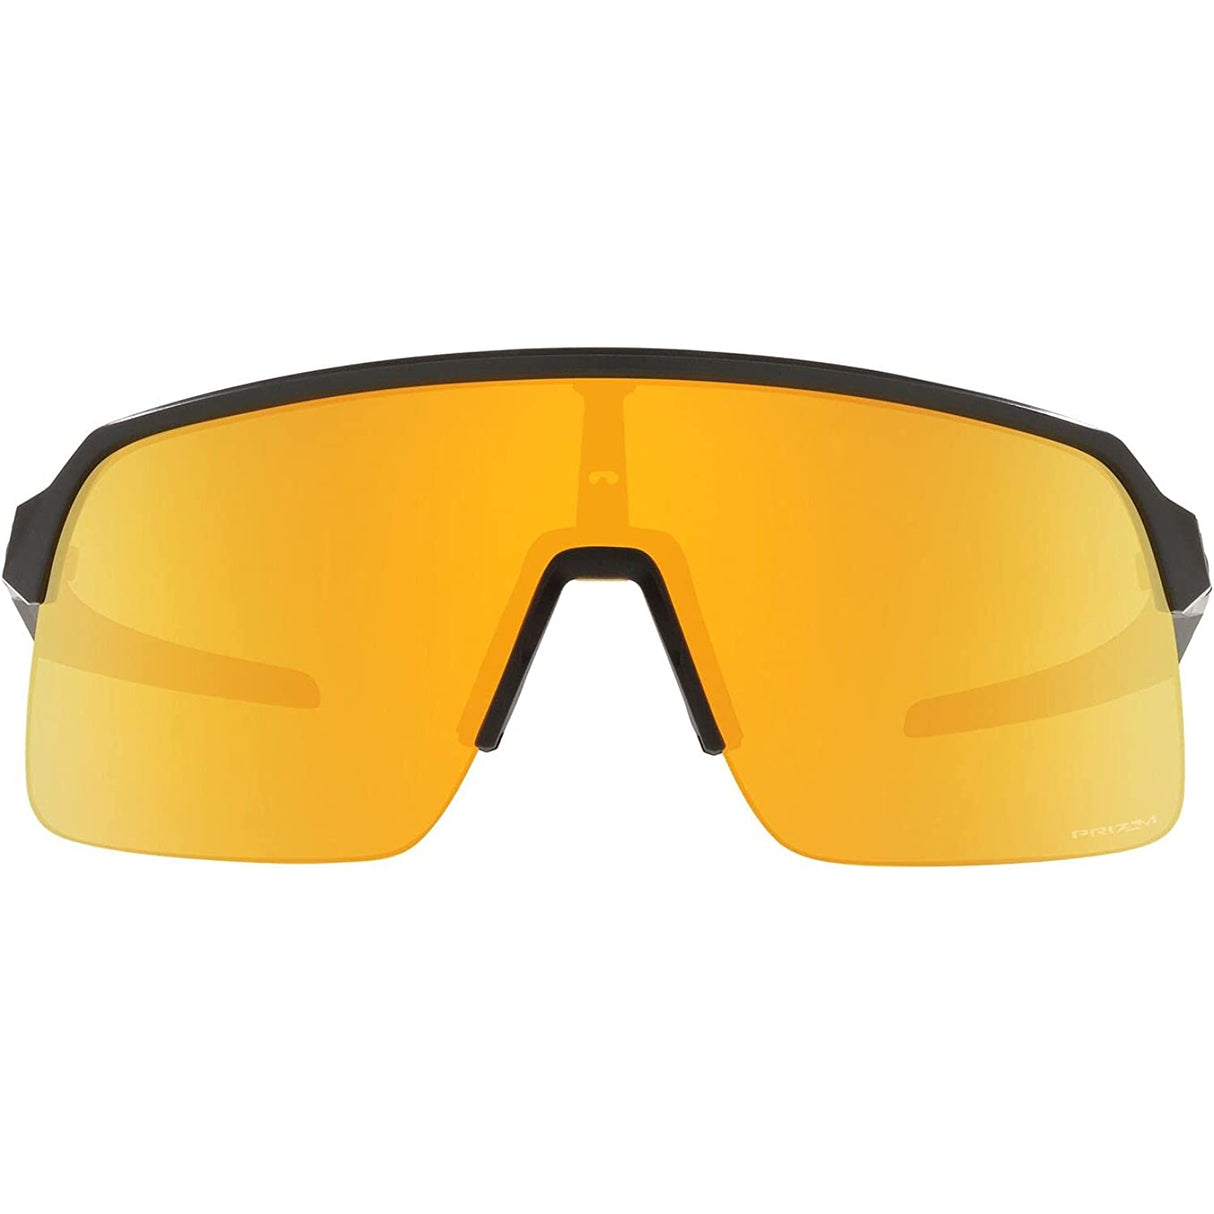 Shop from Oakley USA and Ship to Philippines